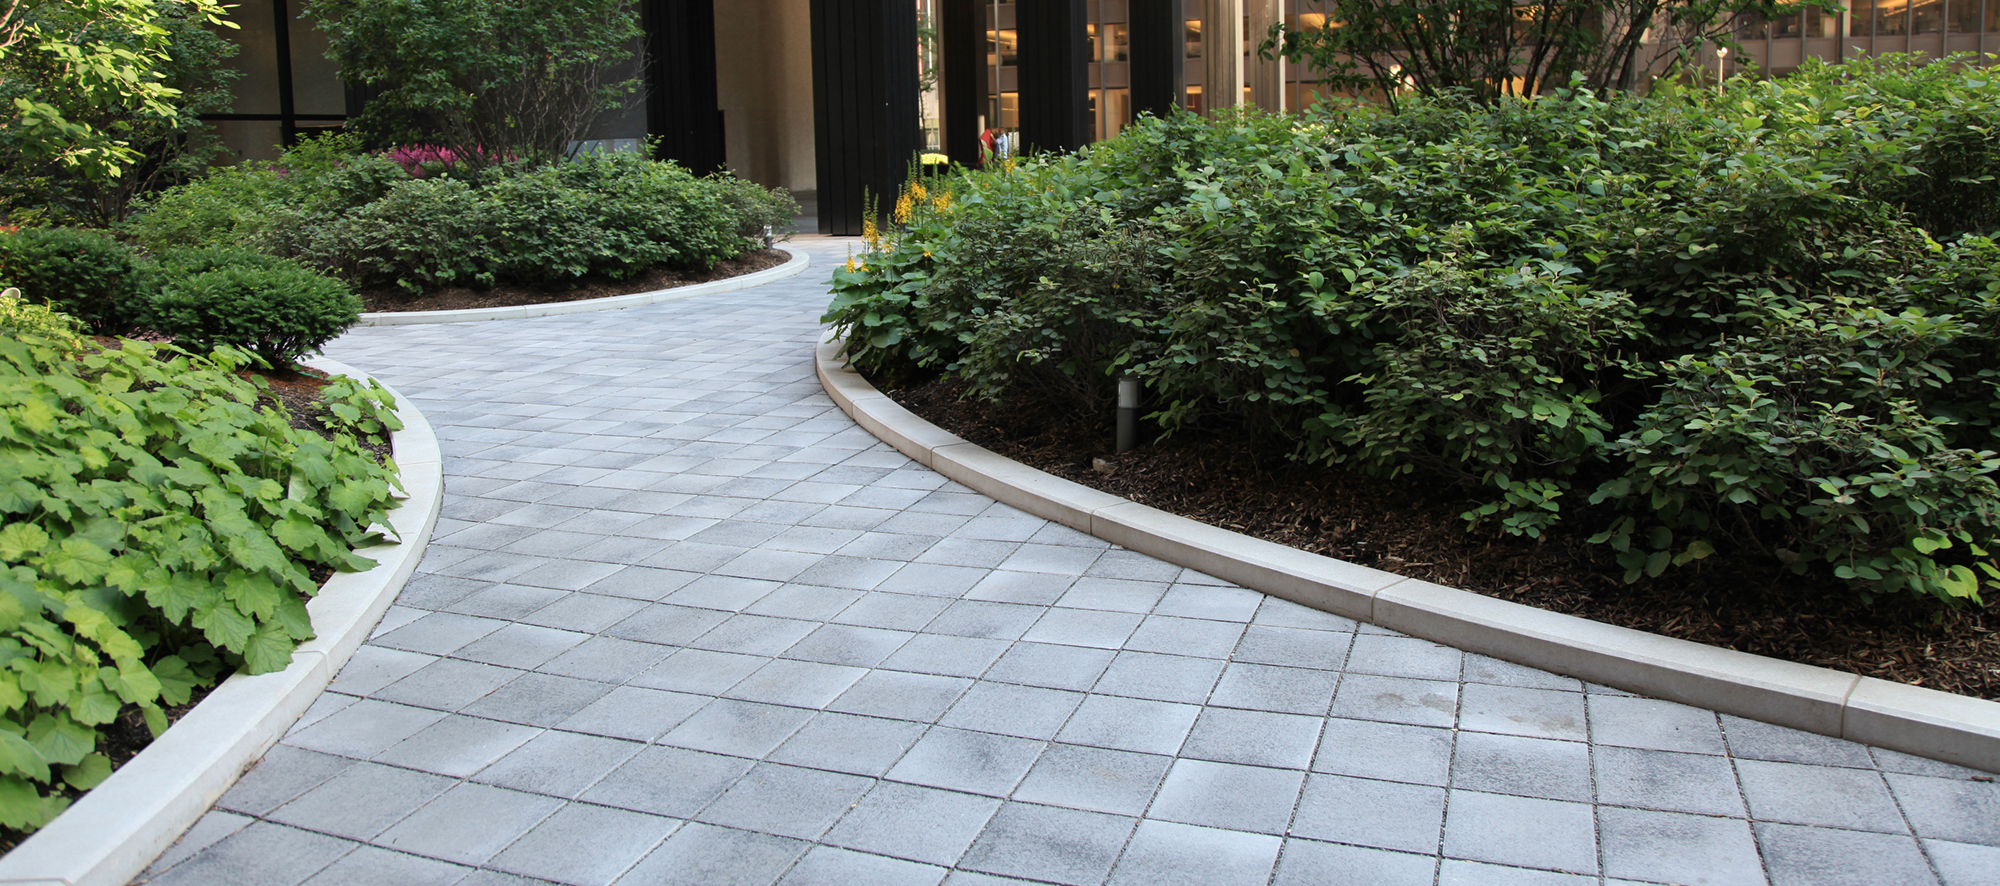 Unilock Umbriano pavers in a custom grey create a curvy walkway and pedestrian area with green space around it, on a condominium roof deck.